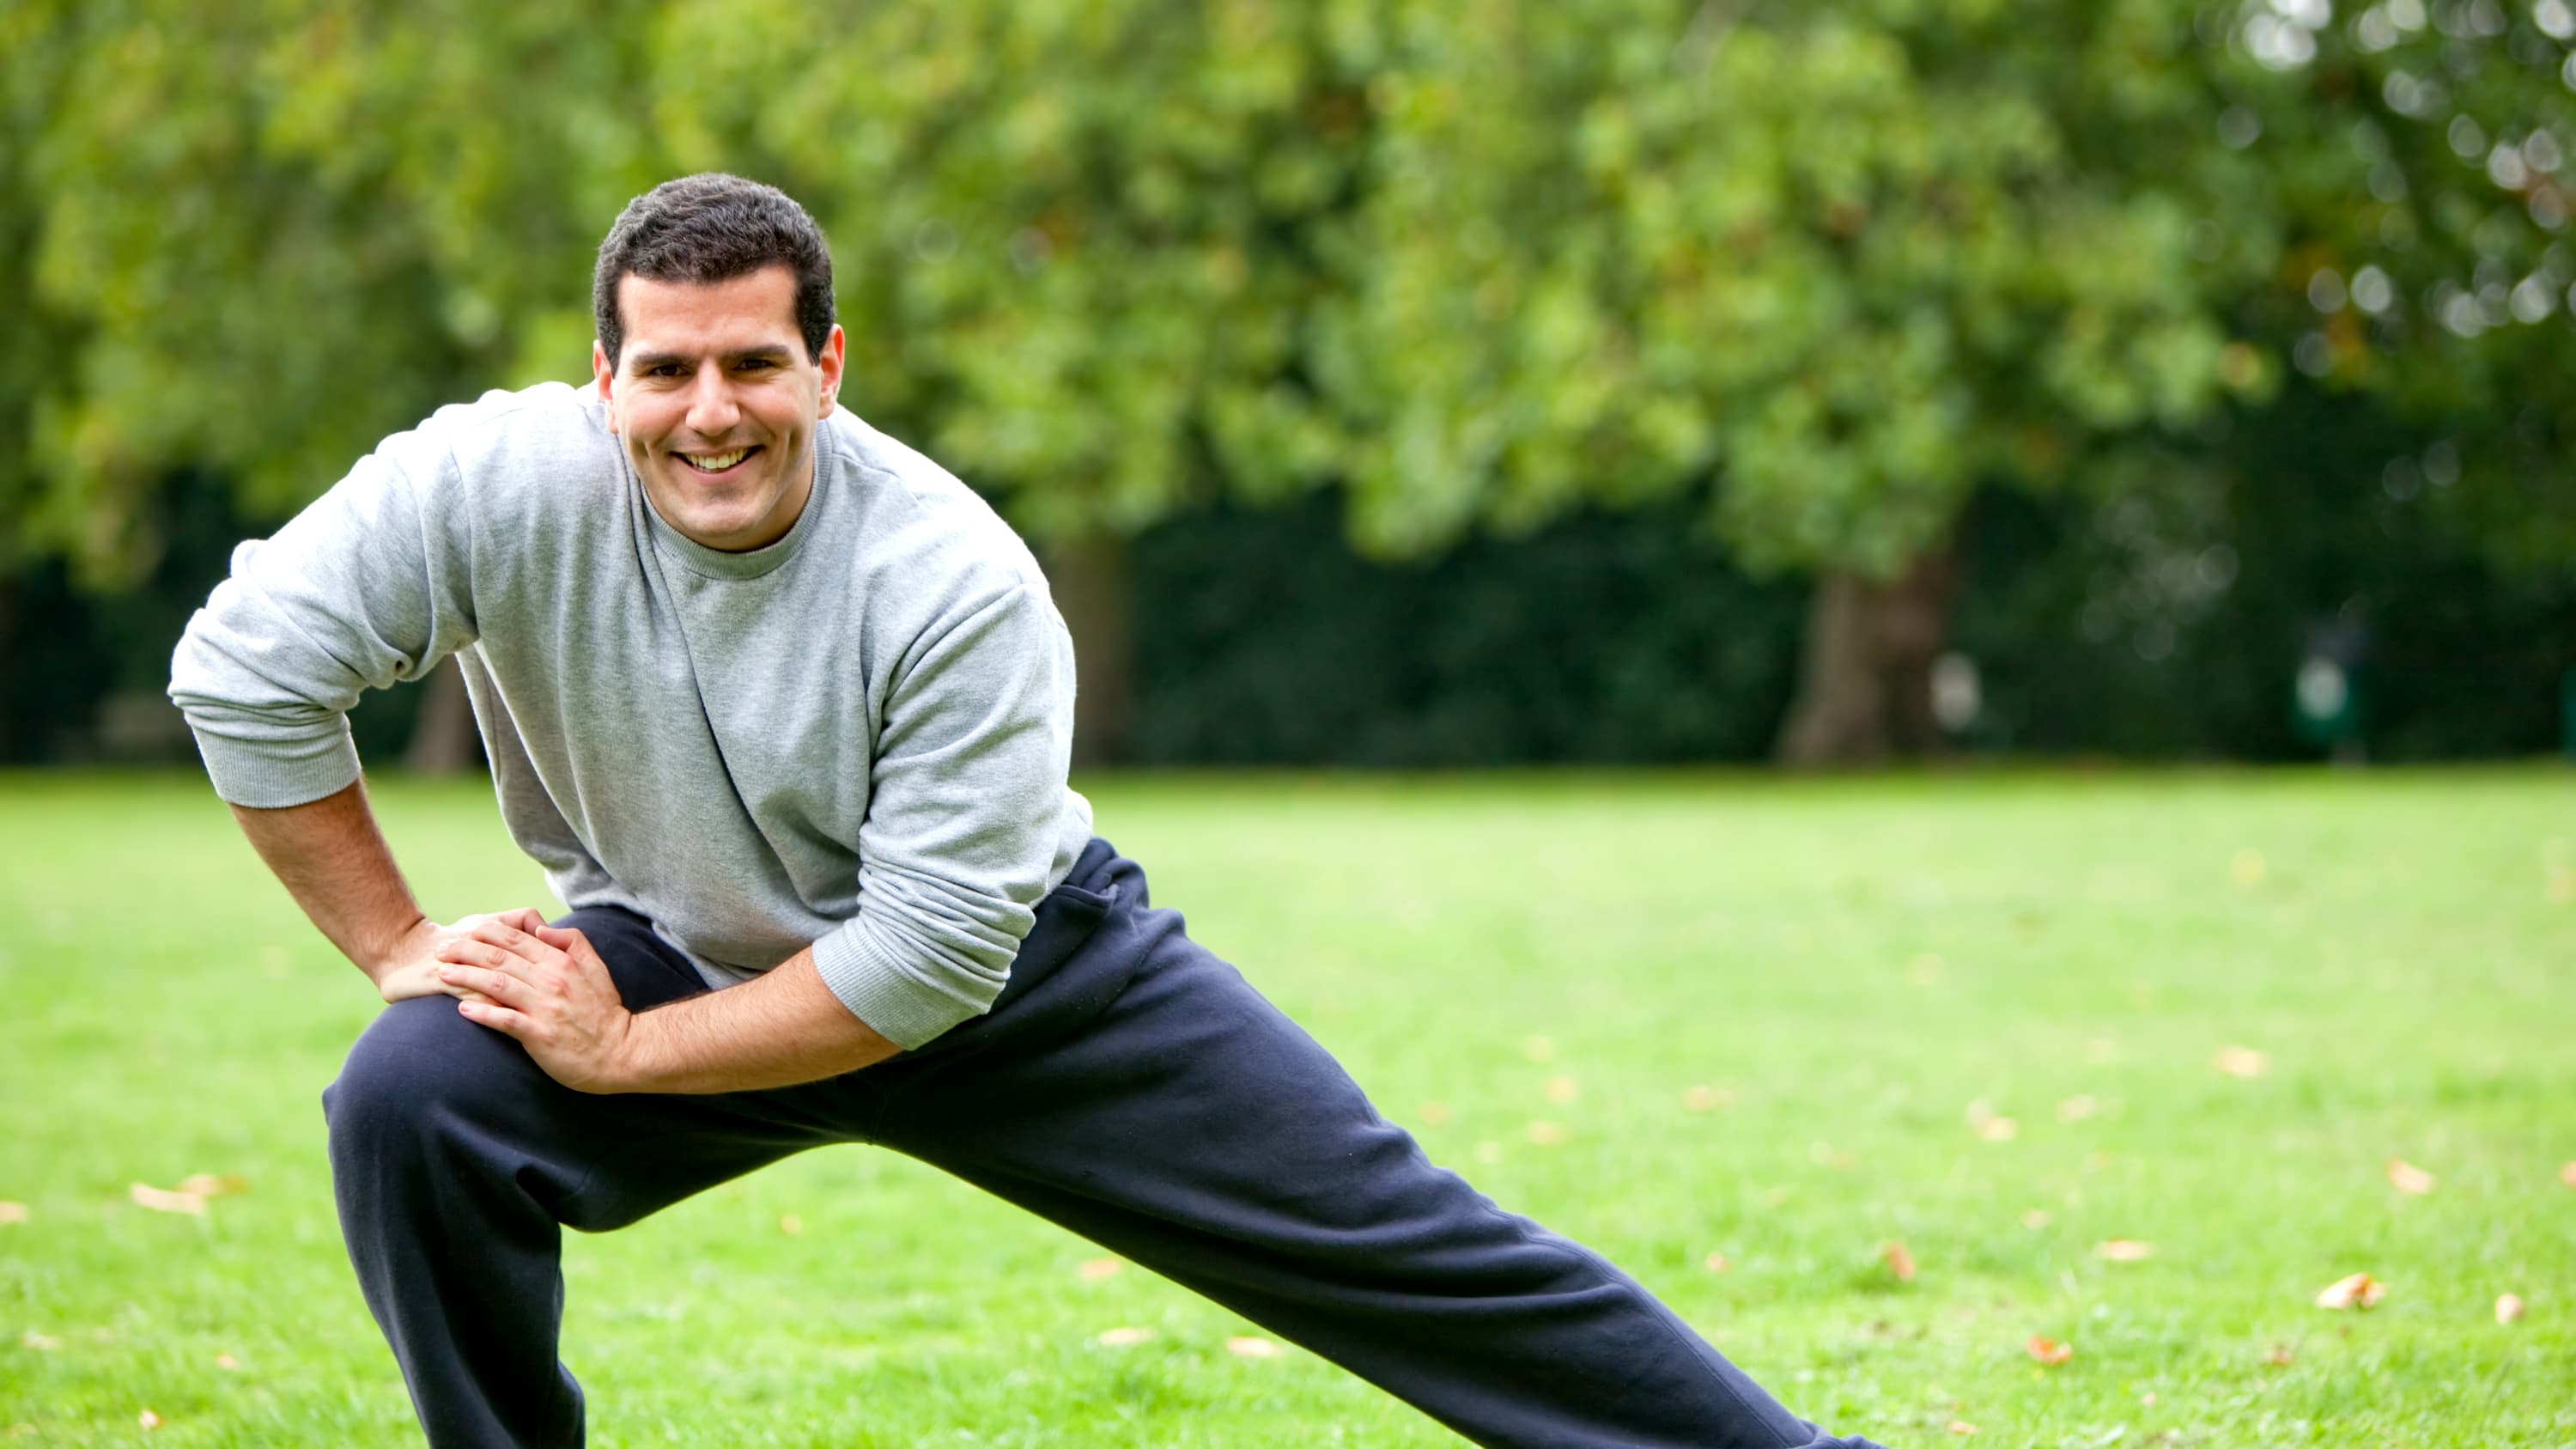 An athletic man in sweatpants who finally has pain relief after surgery stretches in the park.